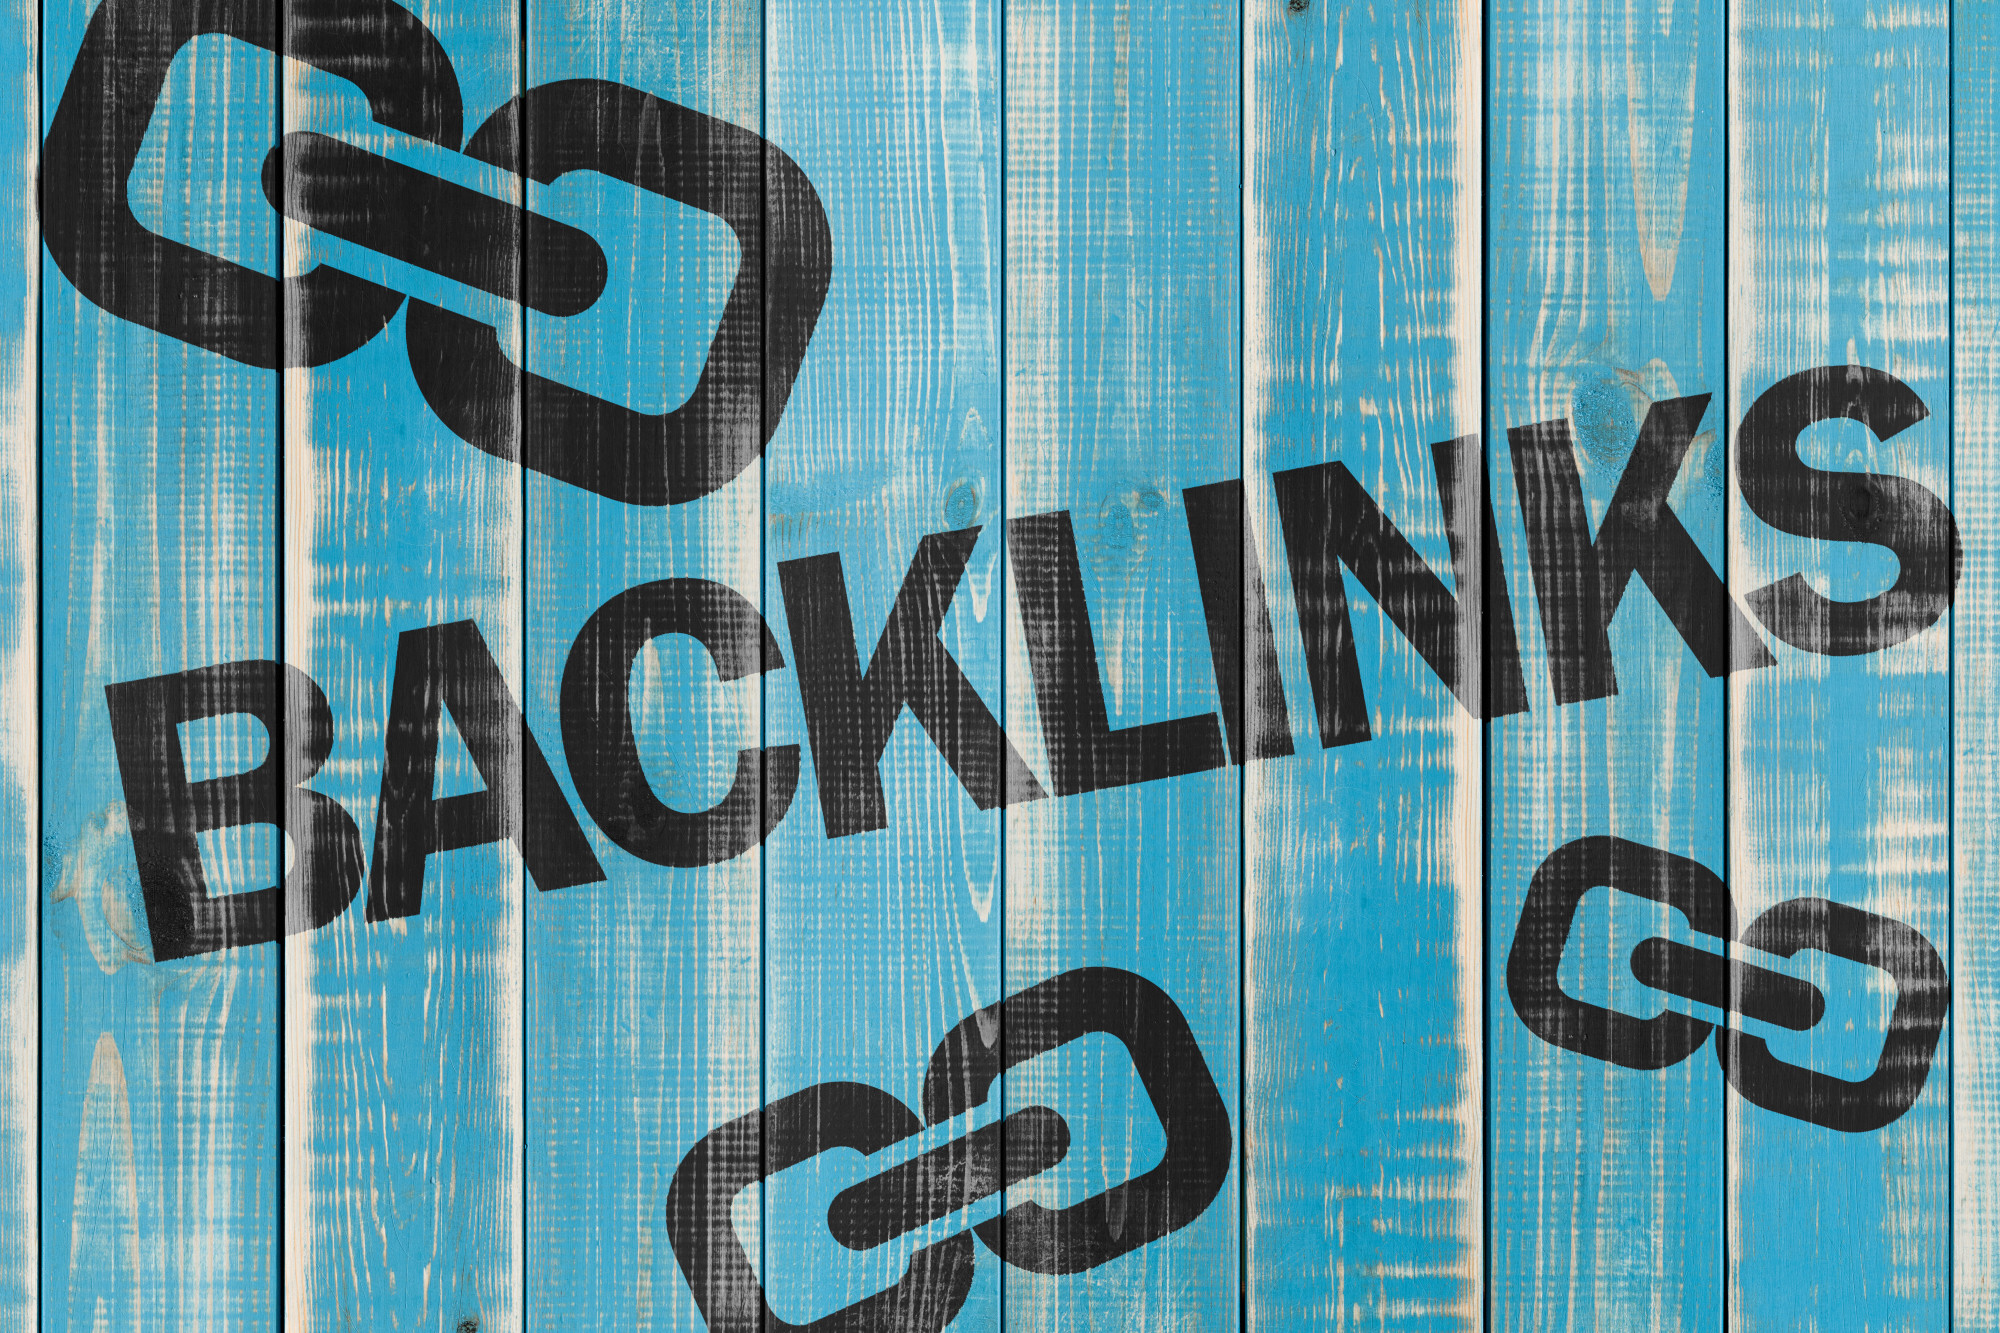 Image of Backlink text